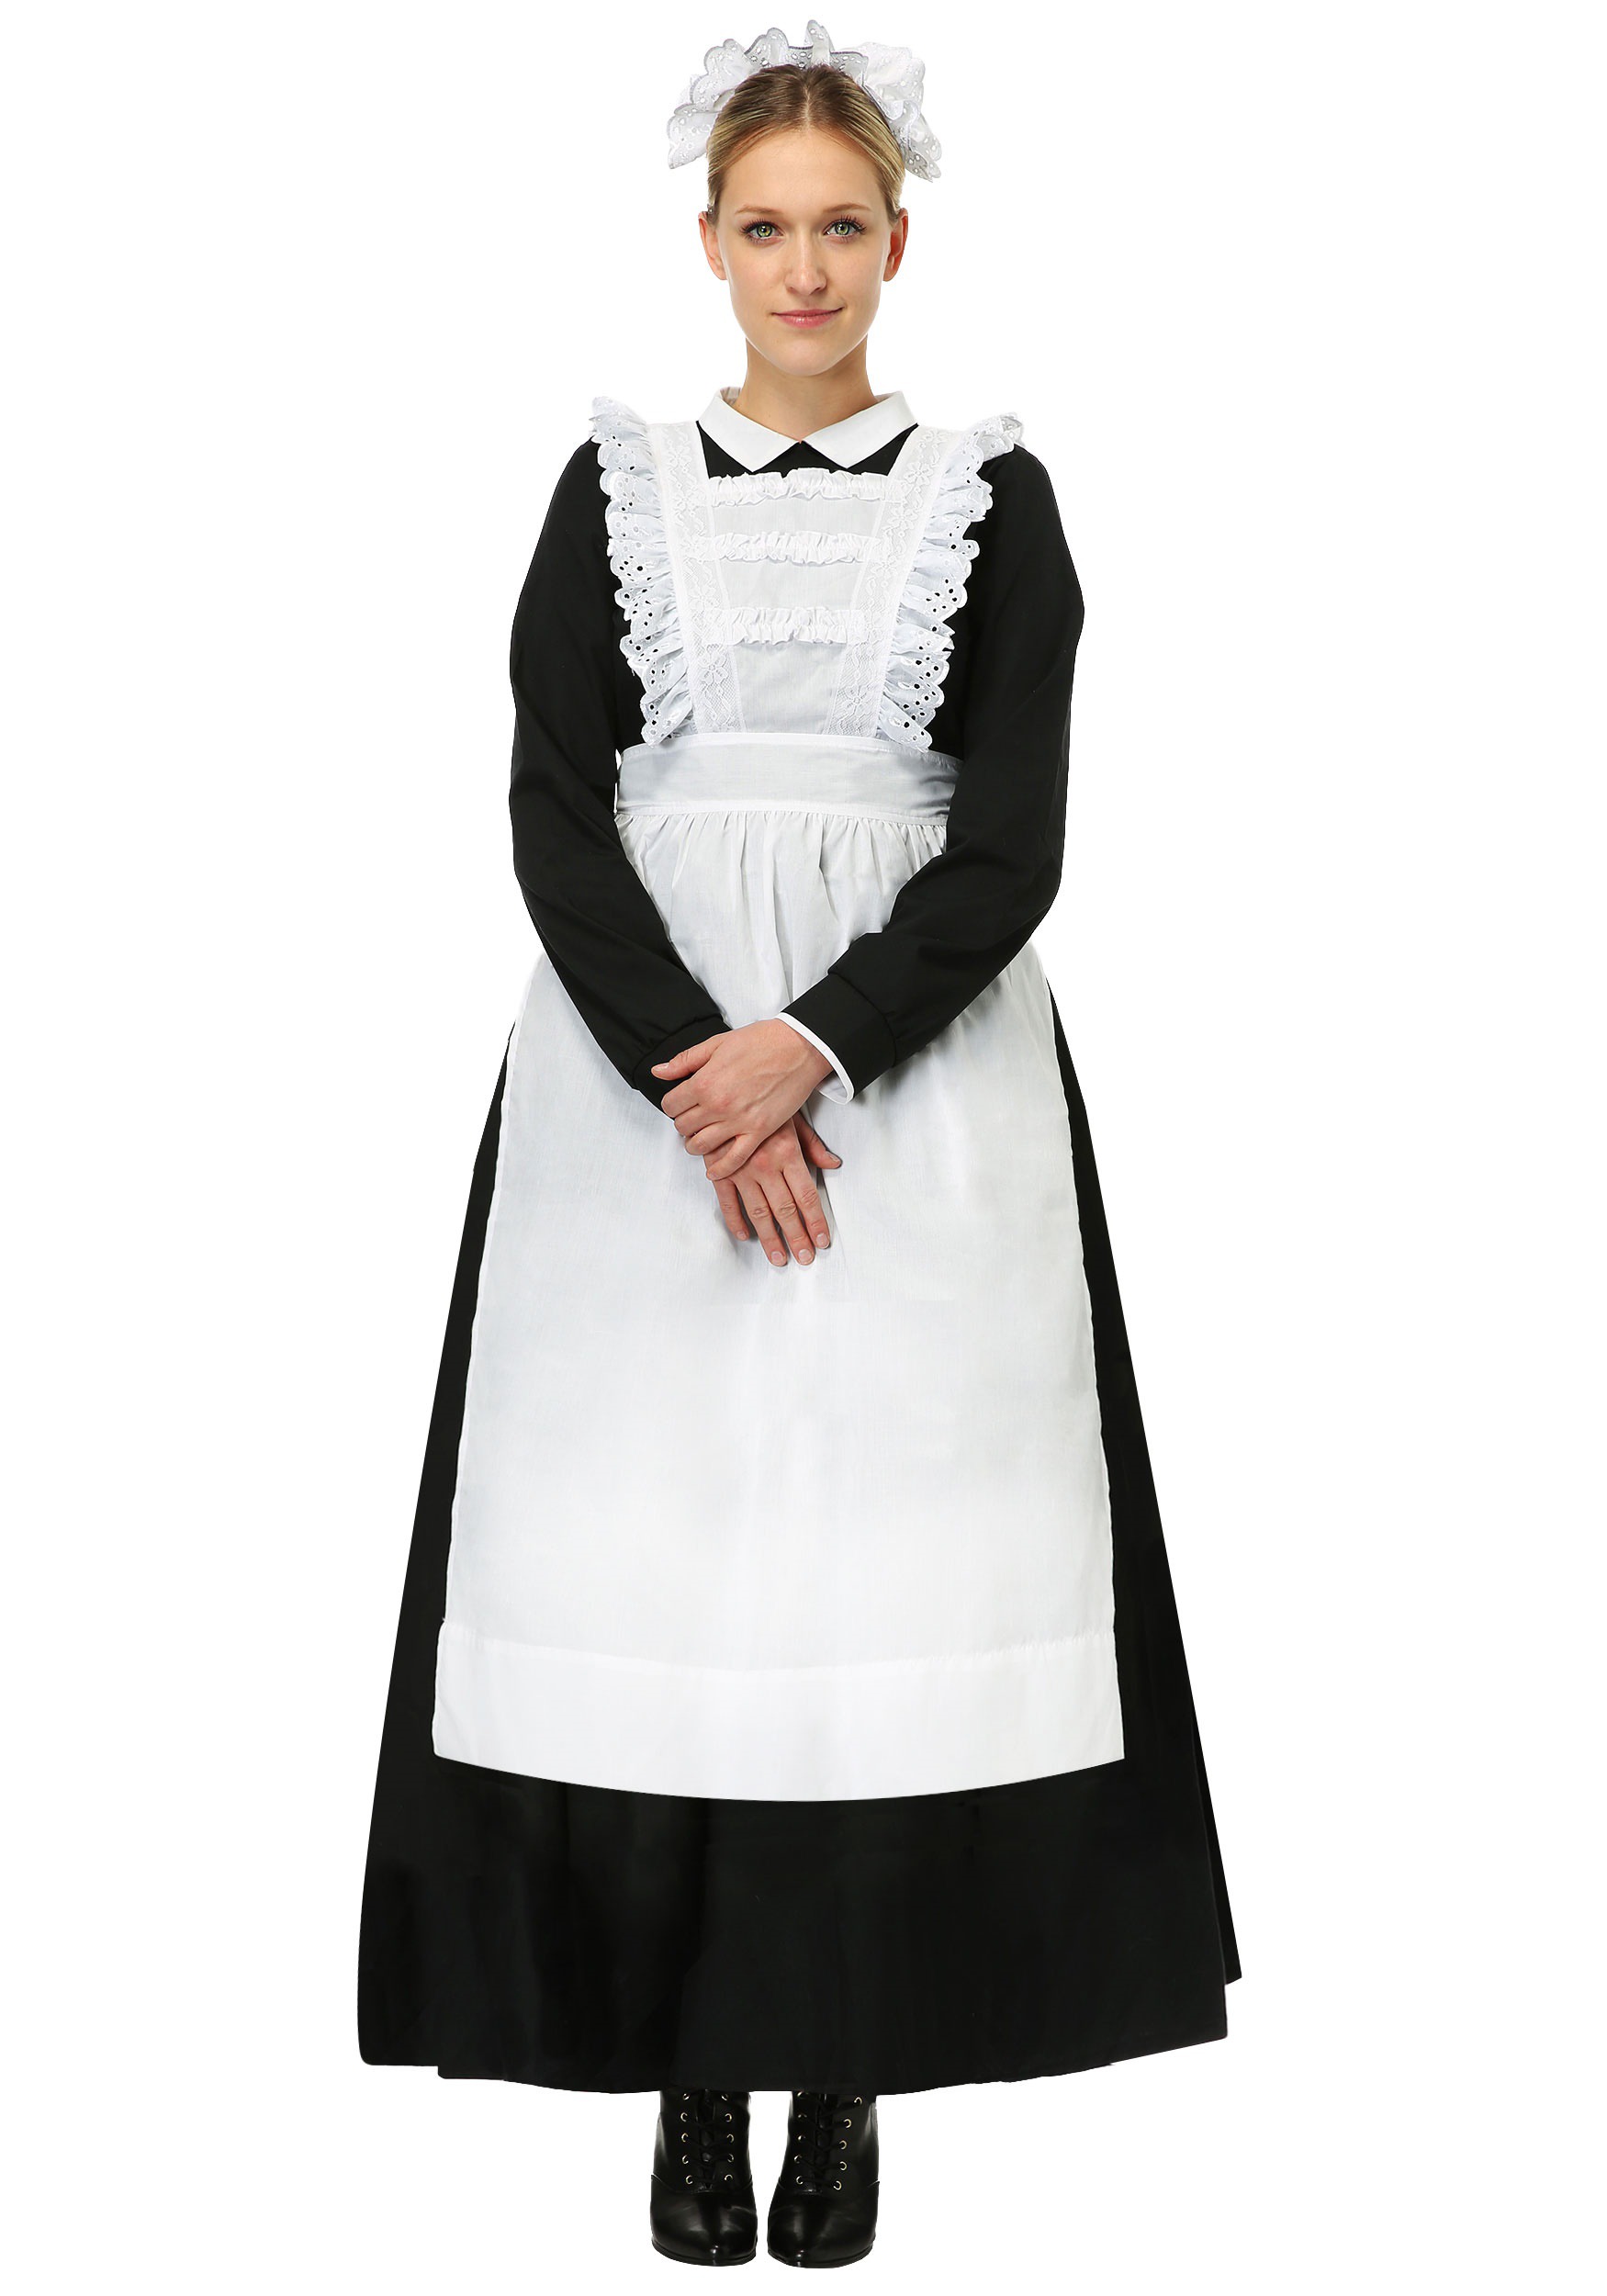 Women's Traditional Maid Costume